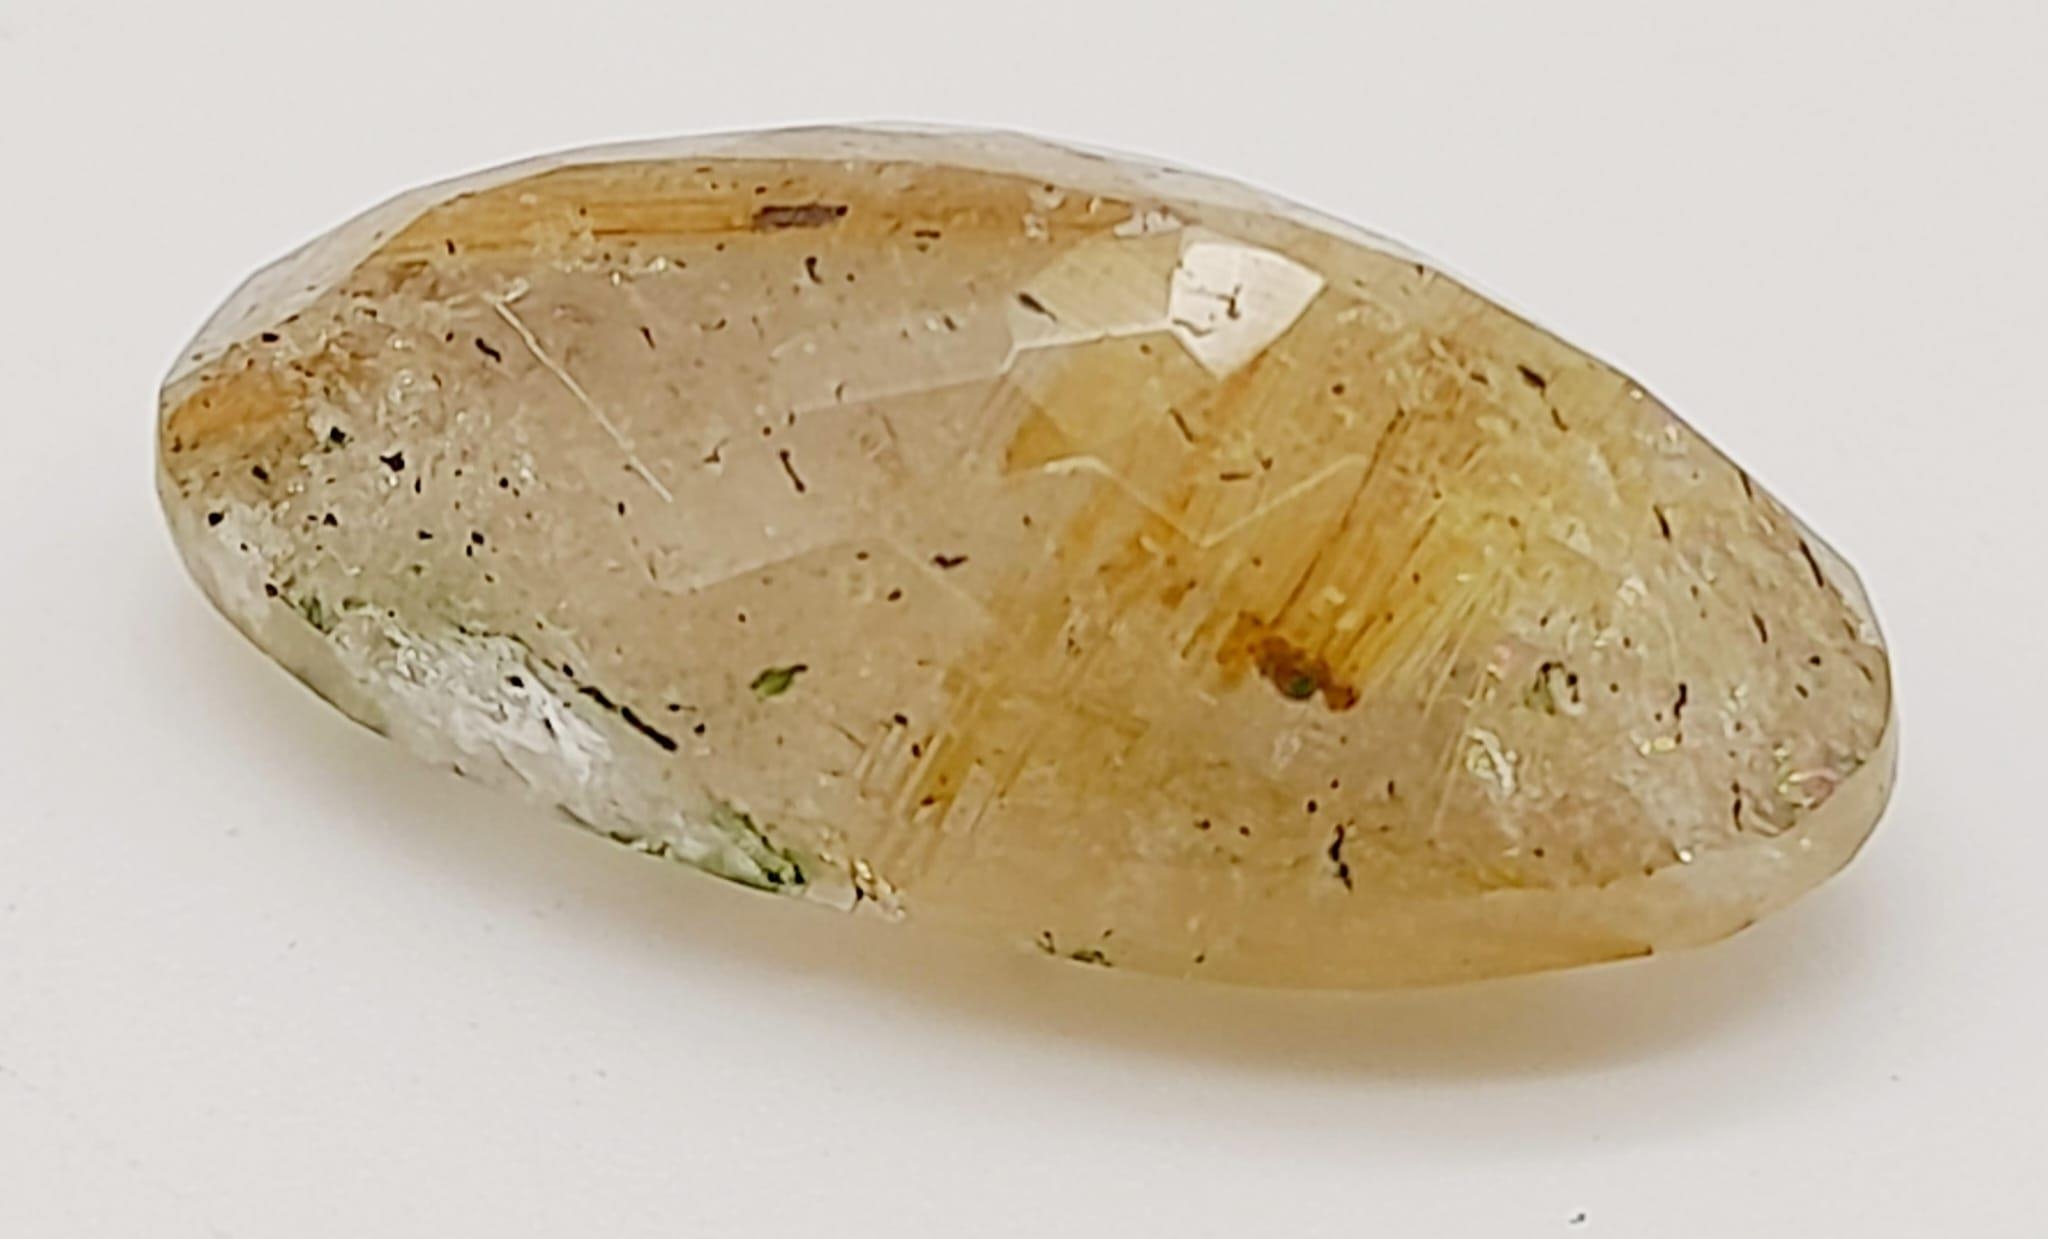 A 13.10ct Natural Rutile Quartz, in an Oval Shape cut. Come with the GLI Certificate - Image 3 of 8